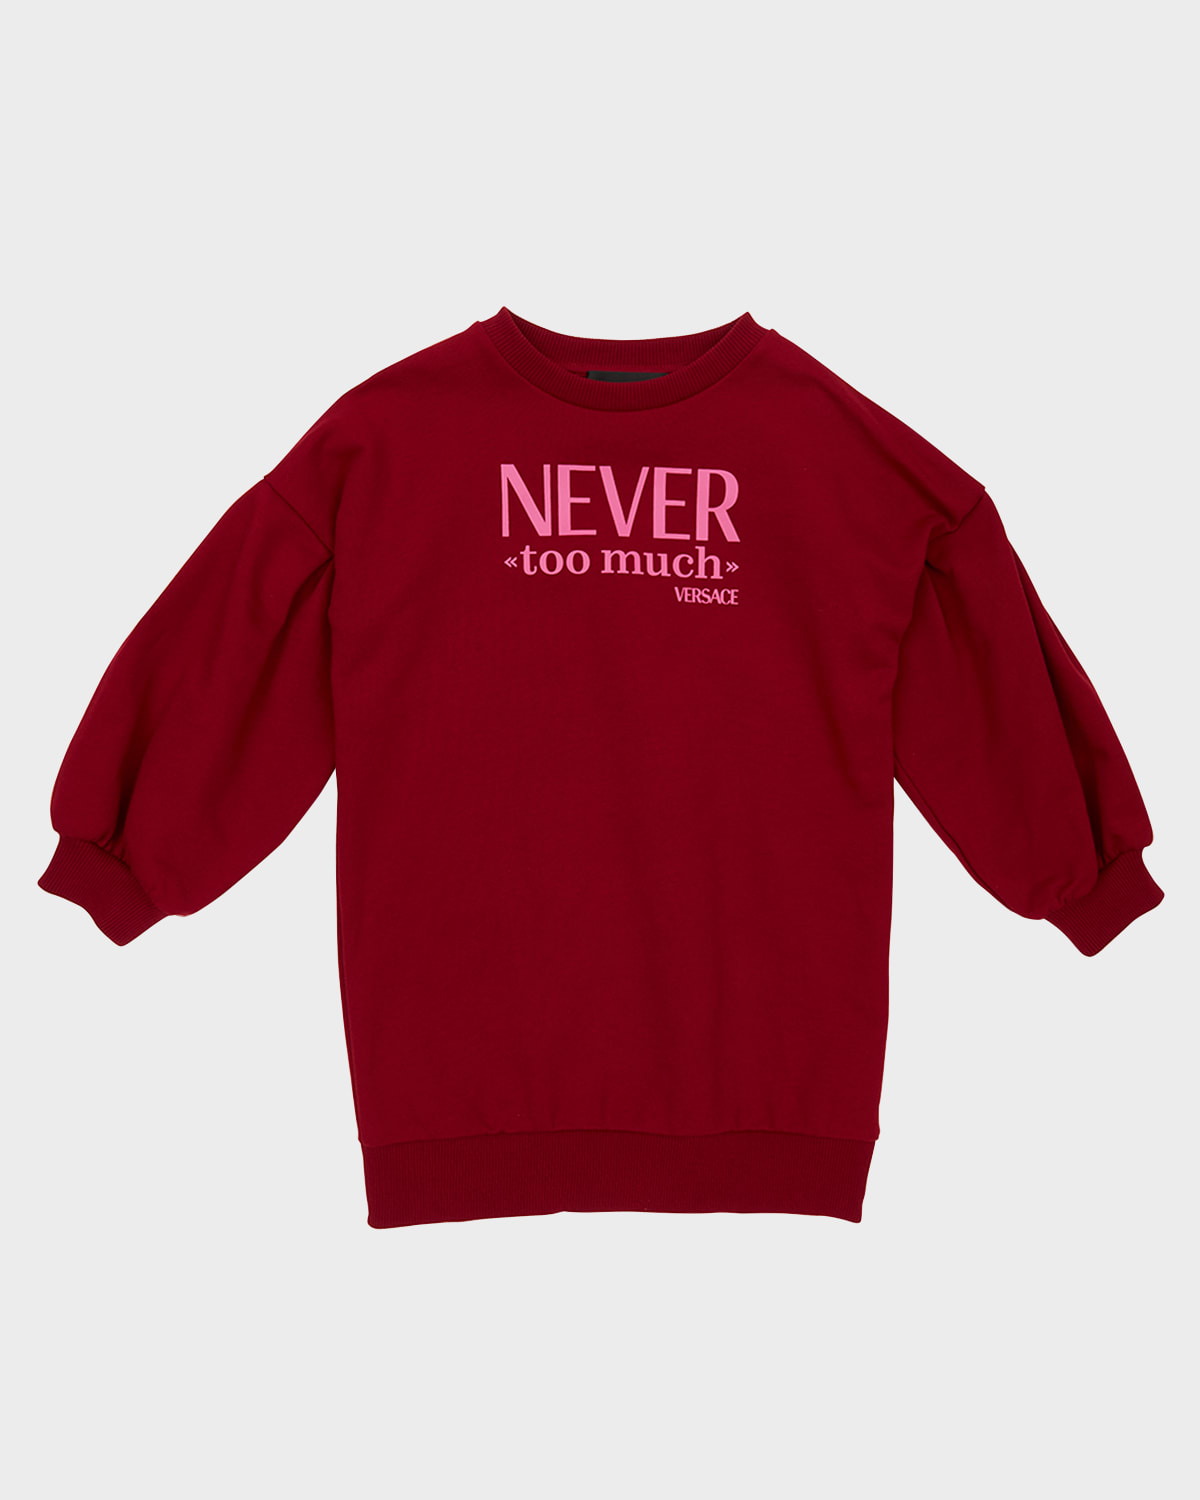 Versace Kids' Never Too Much Sweatshirt In Parade Red/pink